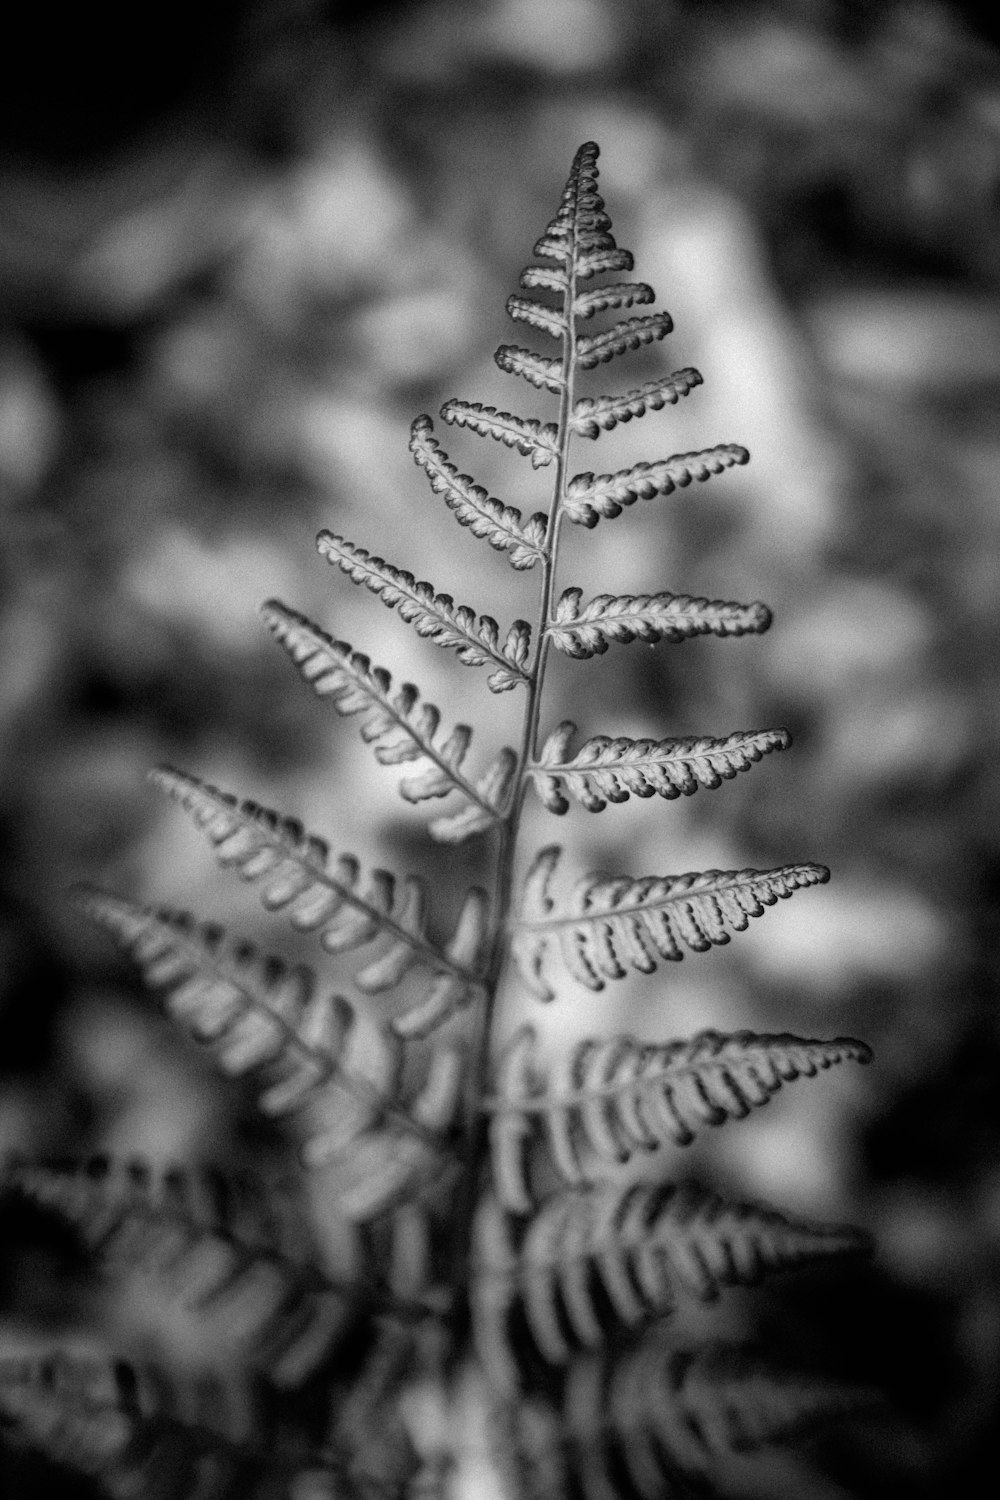 grayscale photo of plant with water droplets